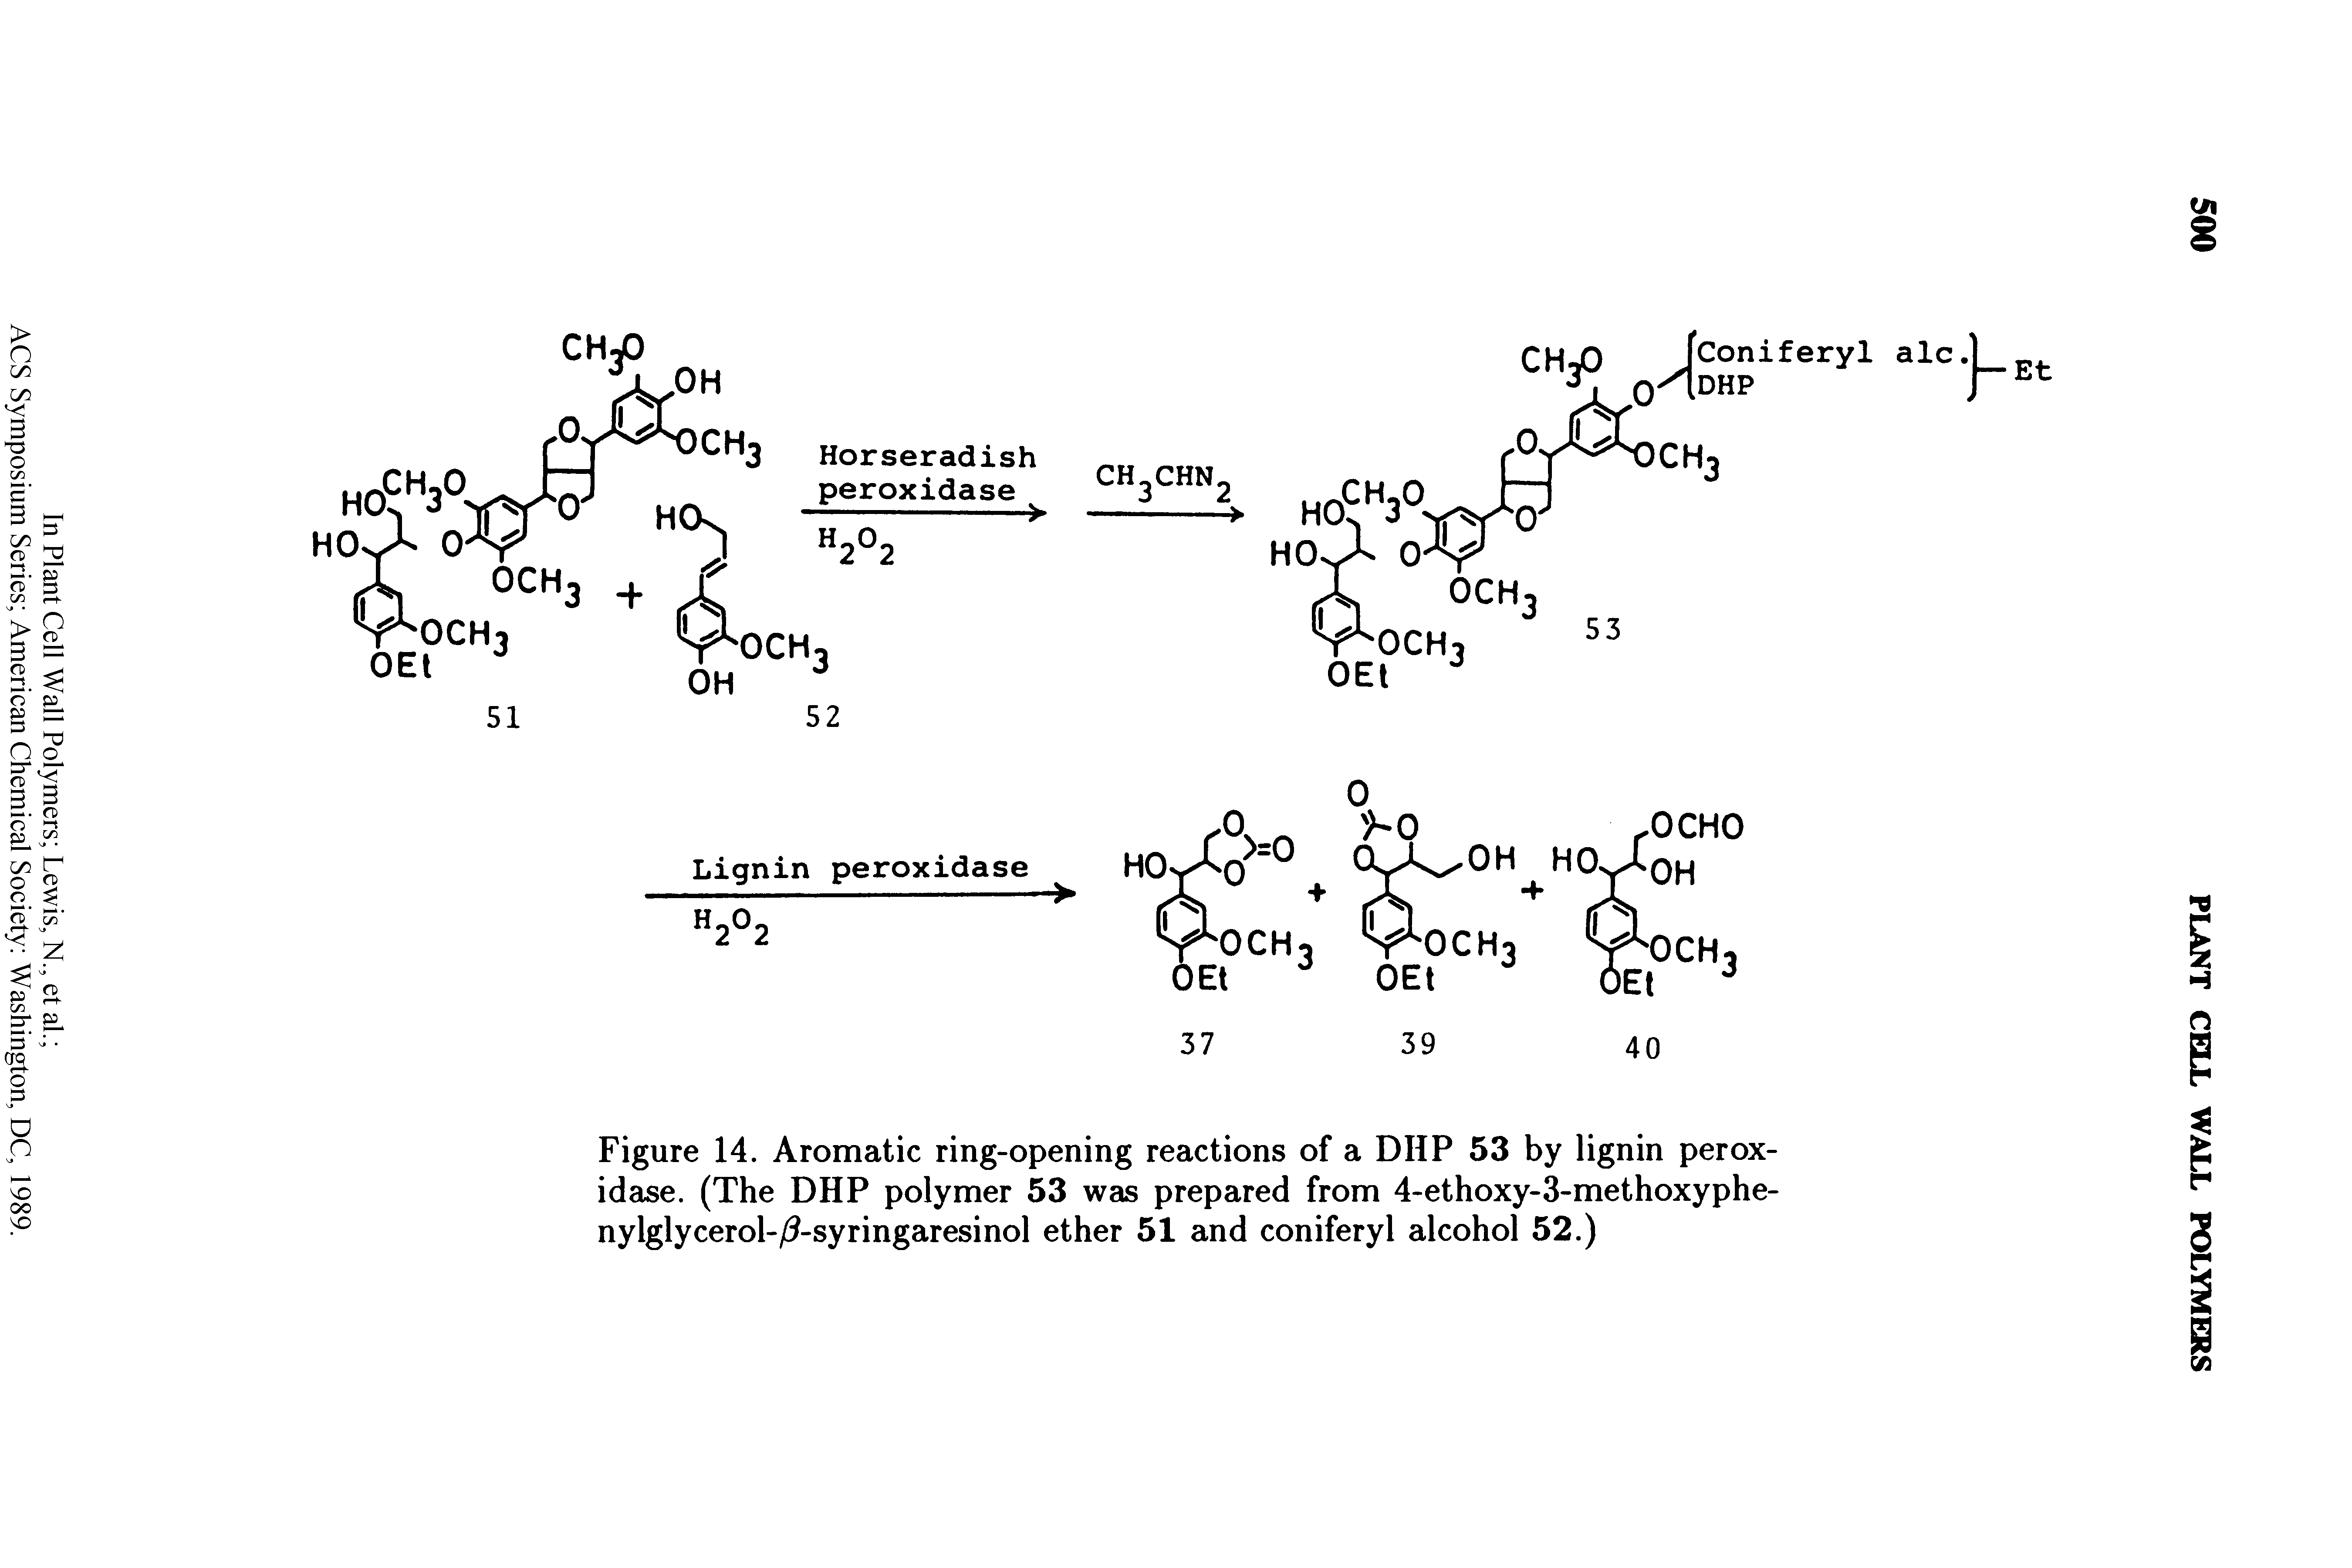 Figure 14. Aromatic ring-opening reactions of a DHP 53 by lignin peroxidase. (The DHP polymer 53 was prepared from 4-ethoxy-3-methoxyphe-nylglycerol-/ -syringaresinol ether 51 and coniferyl alcohol 52.)...